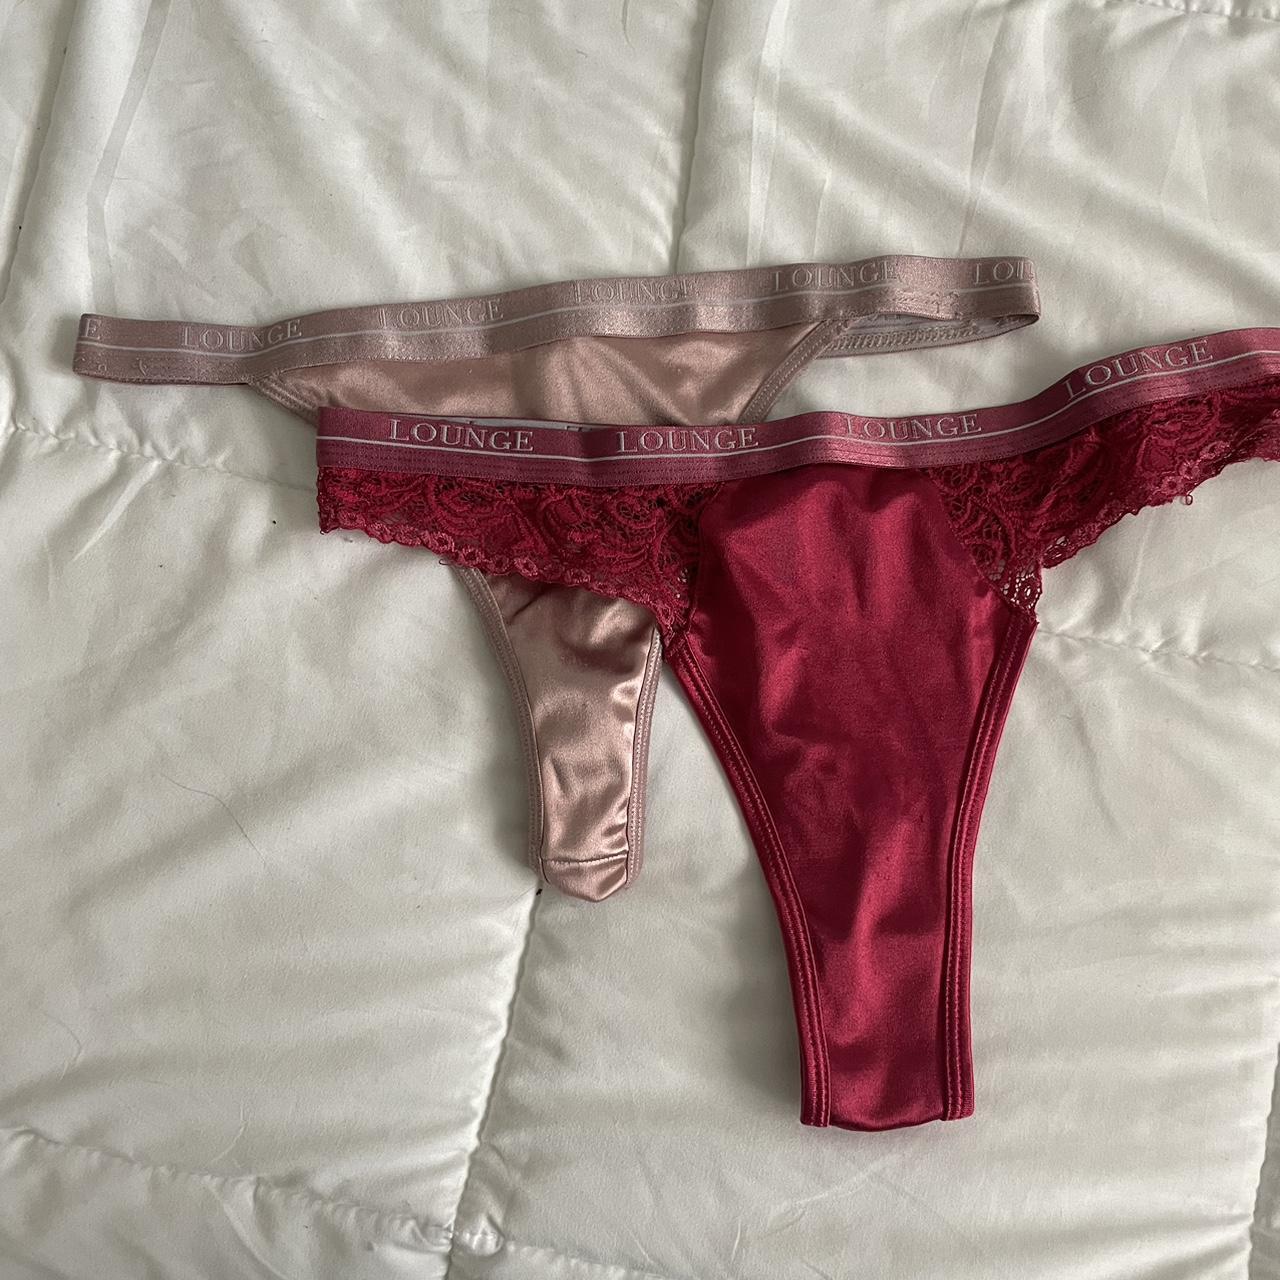 Used panties , $40/thong, Worn items message me for